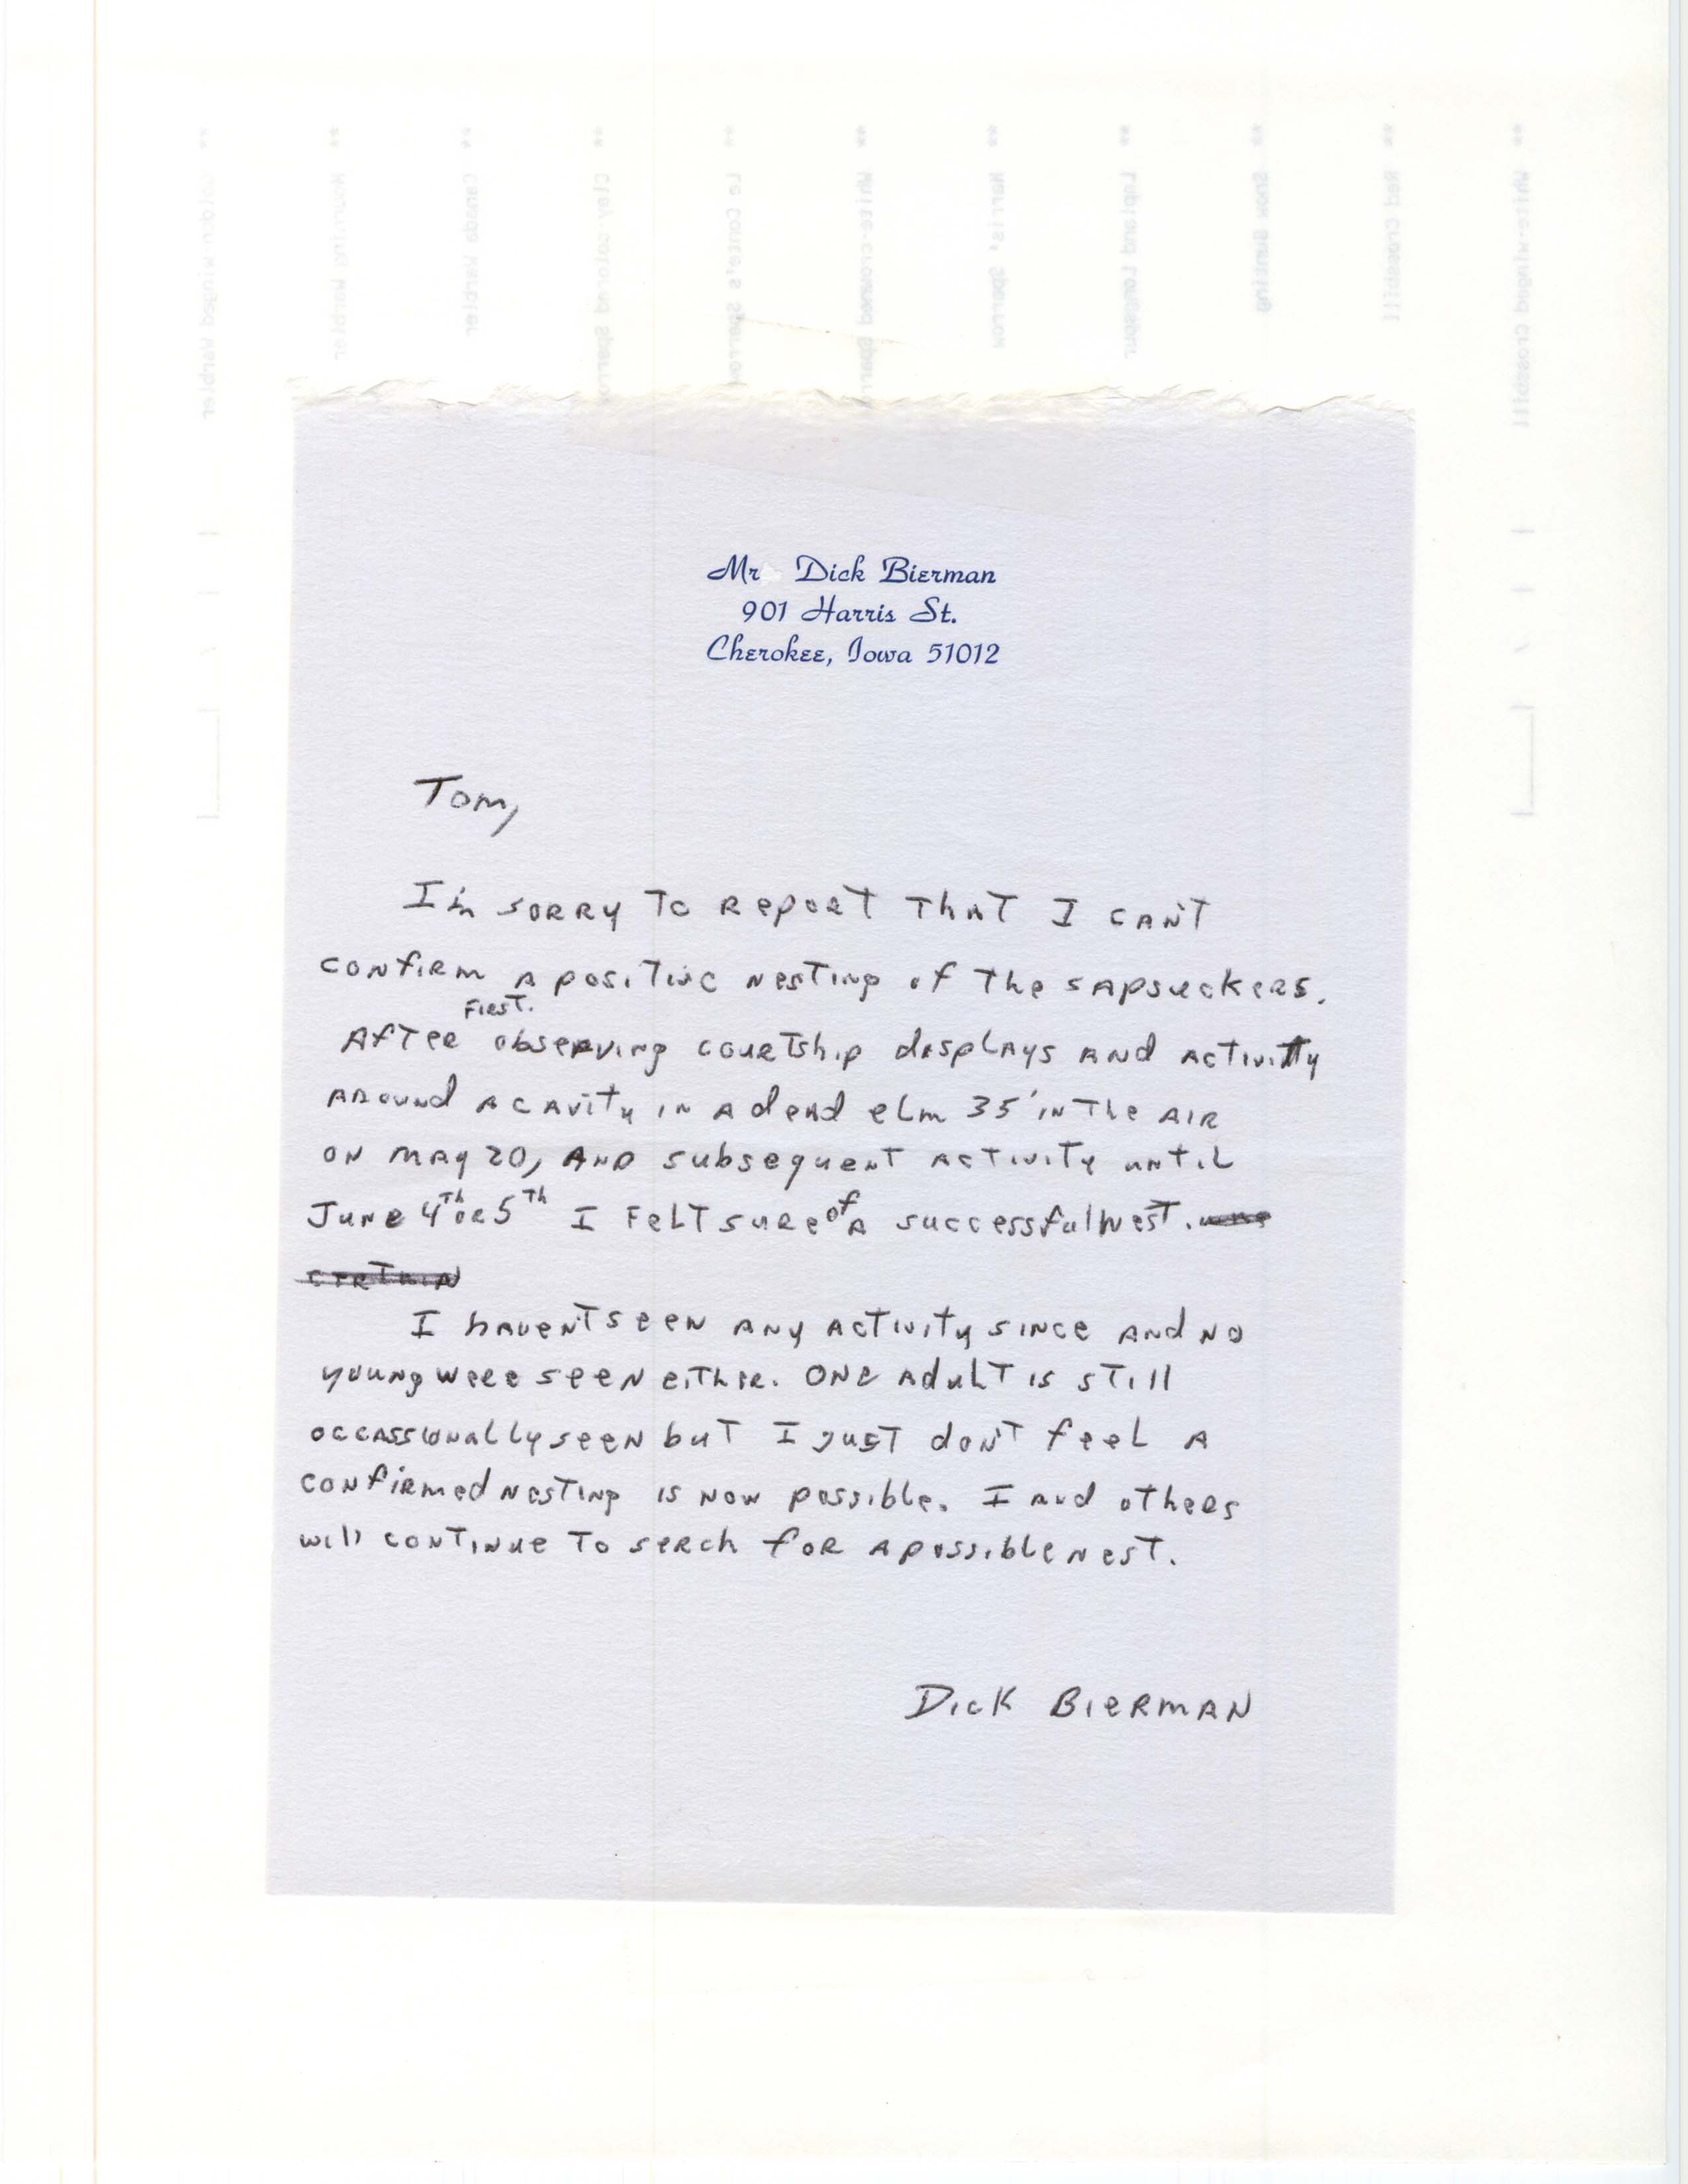 Dick Bierman letter to Thomas Kent regarding a Sapsucker sighting and nest, unknown date